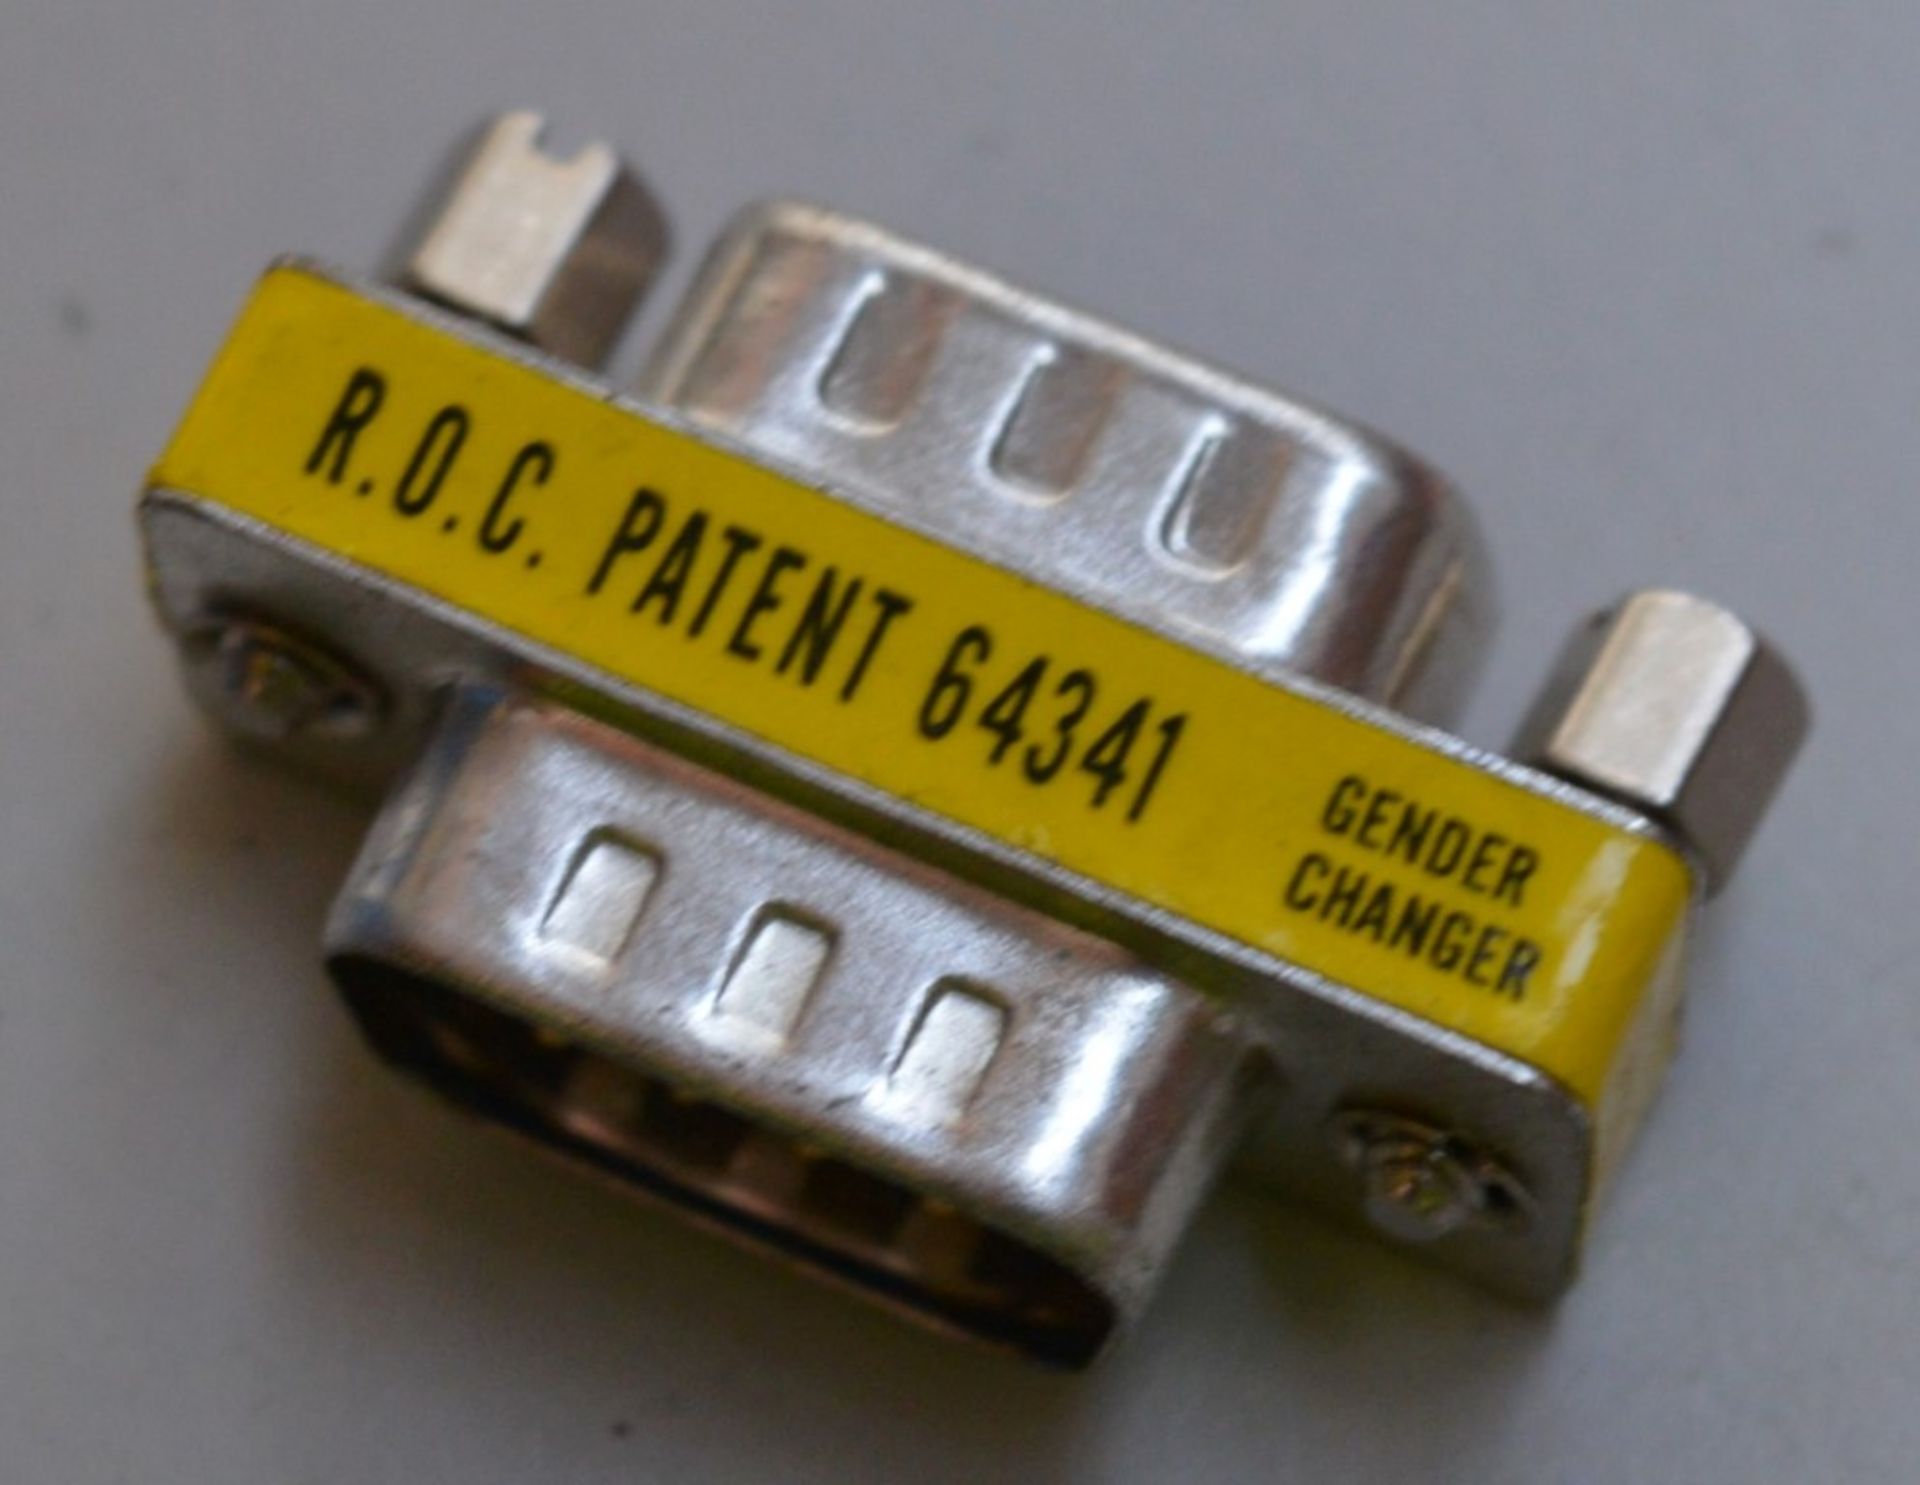 50 x Mini Gender Changers - Female to Female - US Patent Number 5199906 - CL300 - These Port Savers - Image 5 of 5